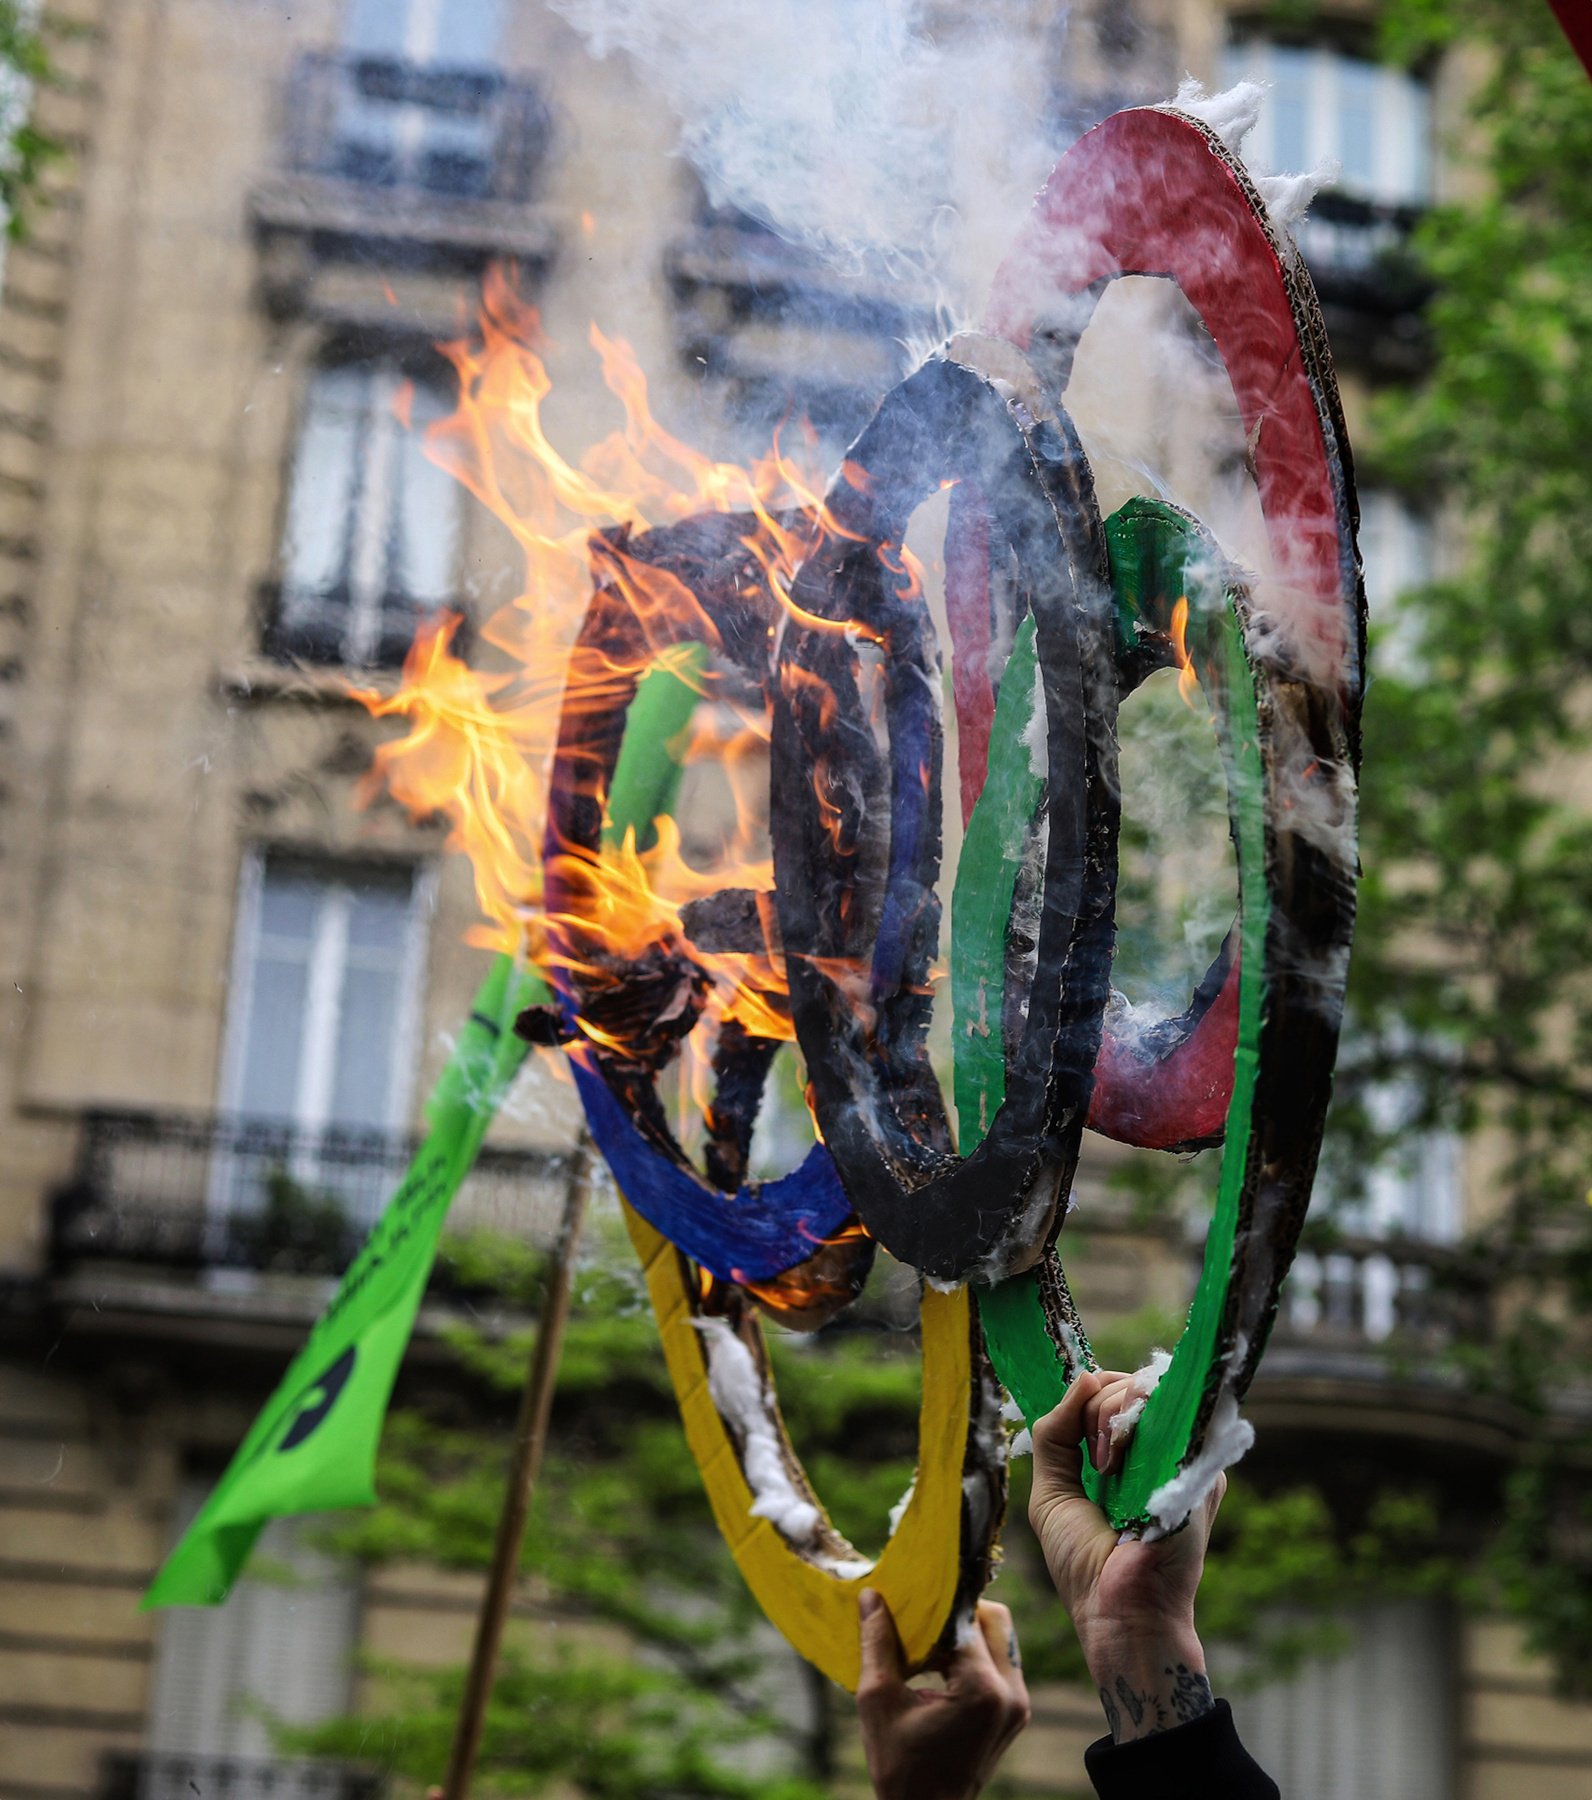 A protester burned the Olympic symbol during a May Day march on the streets of Paris.